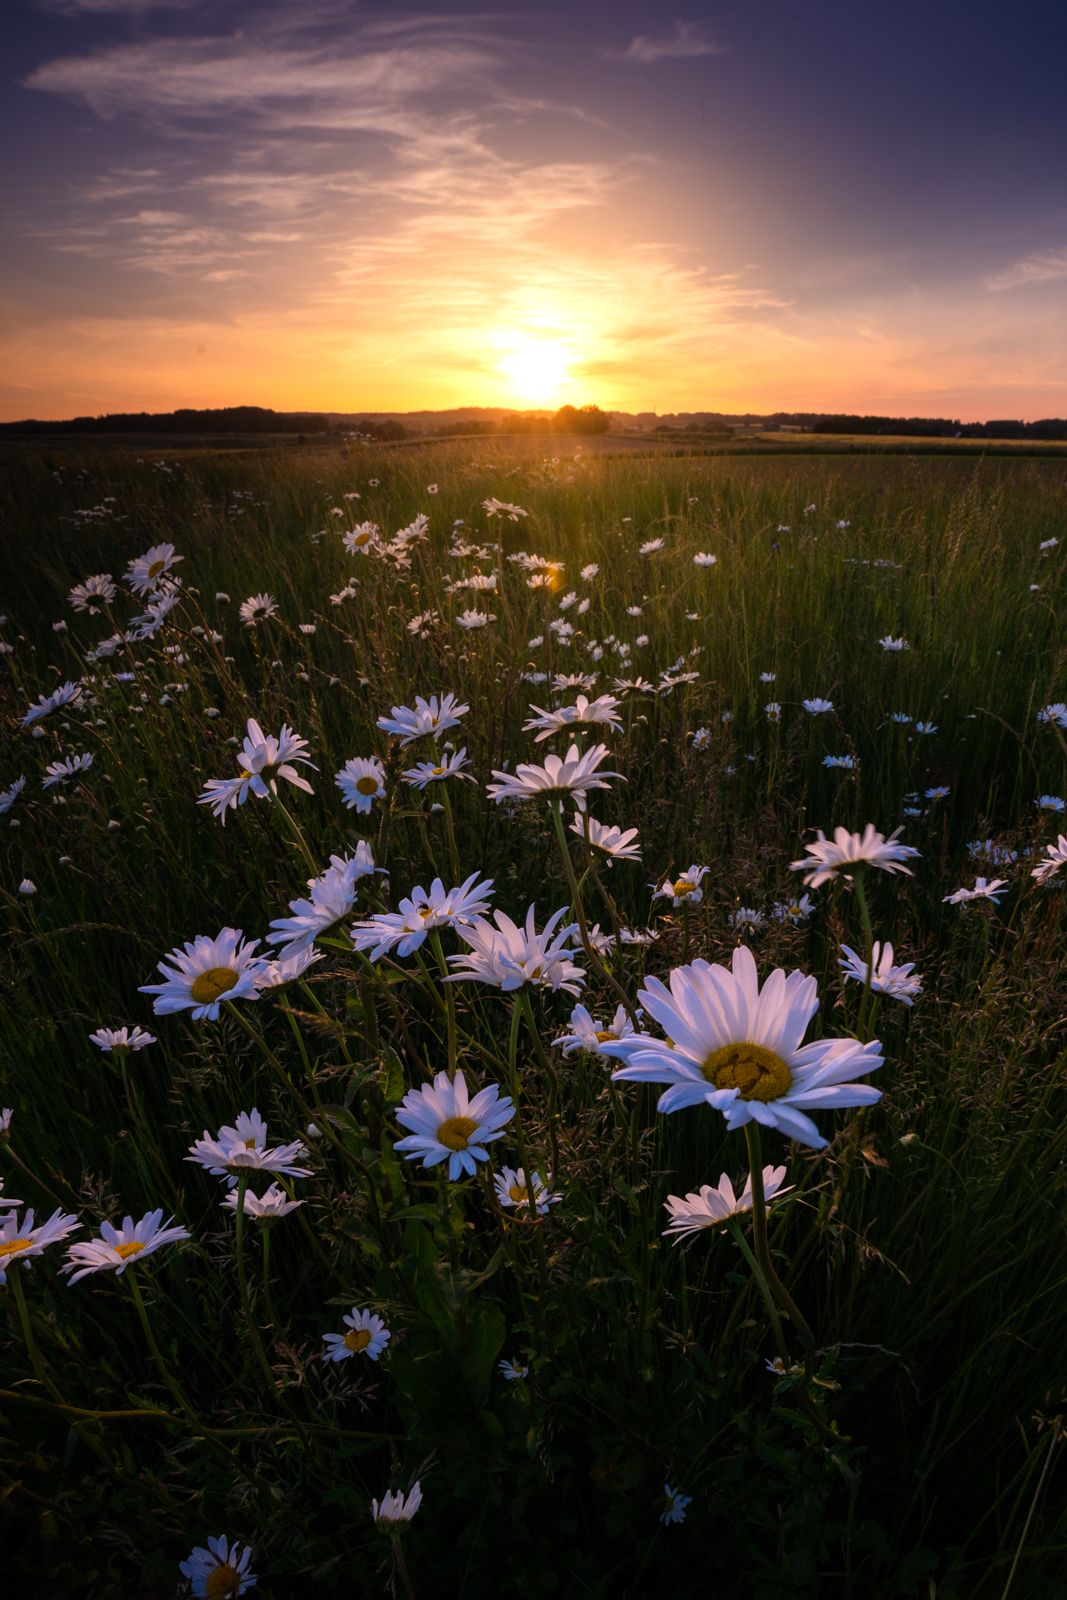 Wildflowers in the fields around Leefdaal, Belgium (Flemish Brabant province) at sunset